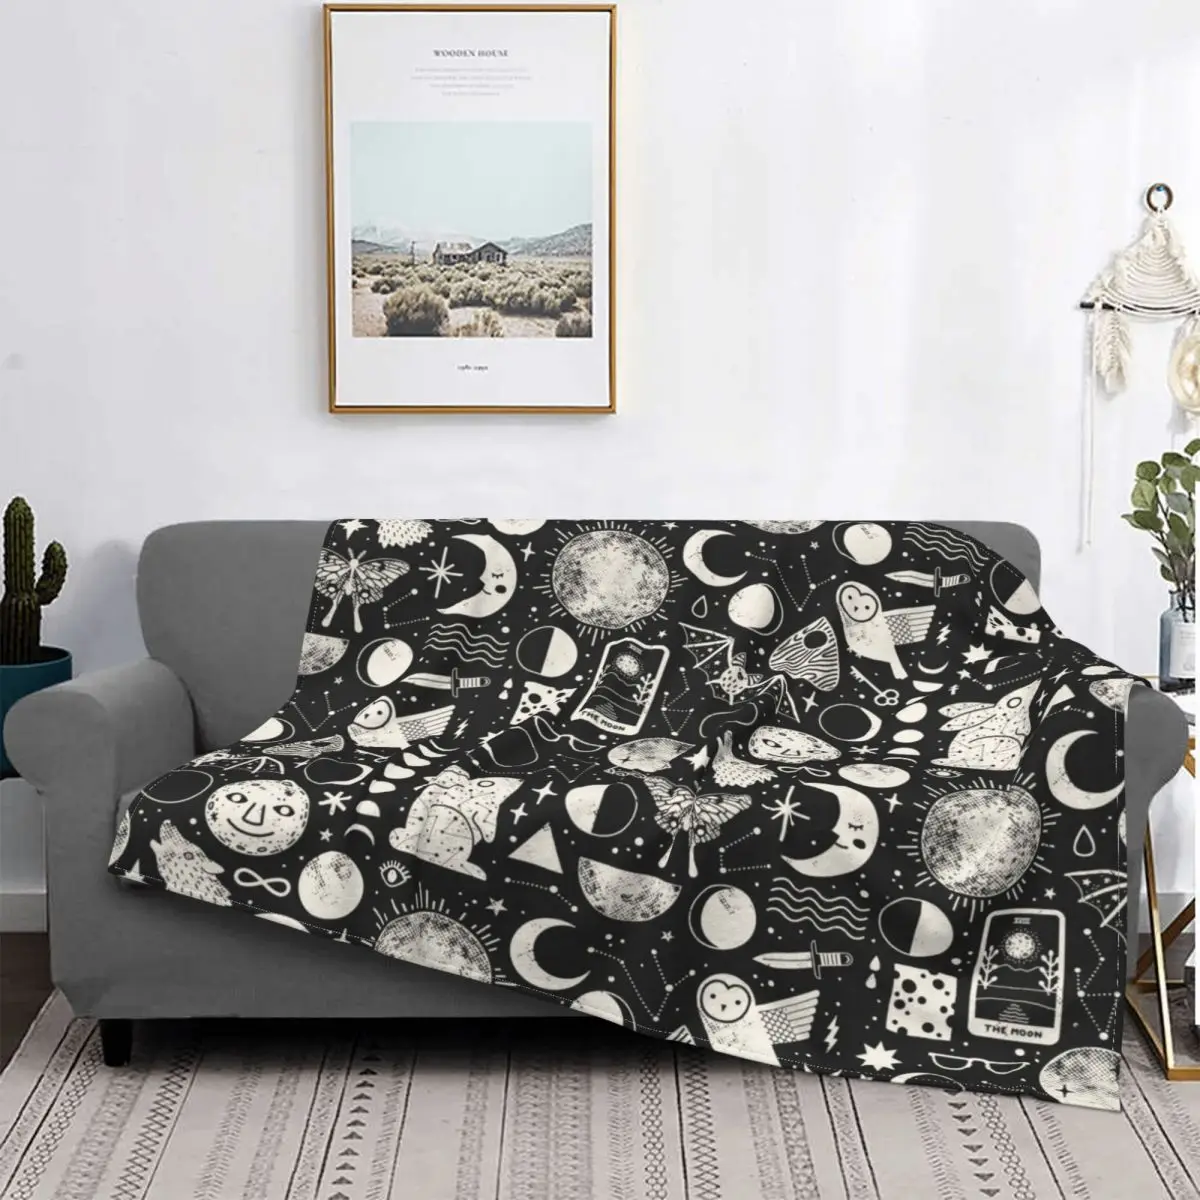 

Lunar Pattern Moon Eclipse Blankets Coral Fleece Plush Textile Decor Space Stars Lightweight Throw Blankets for Home Bedding